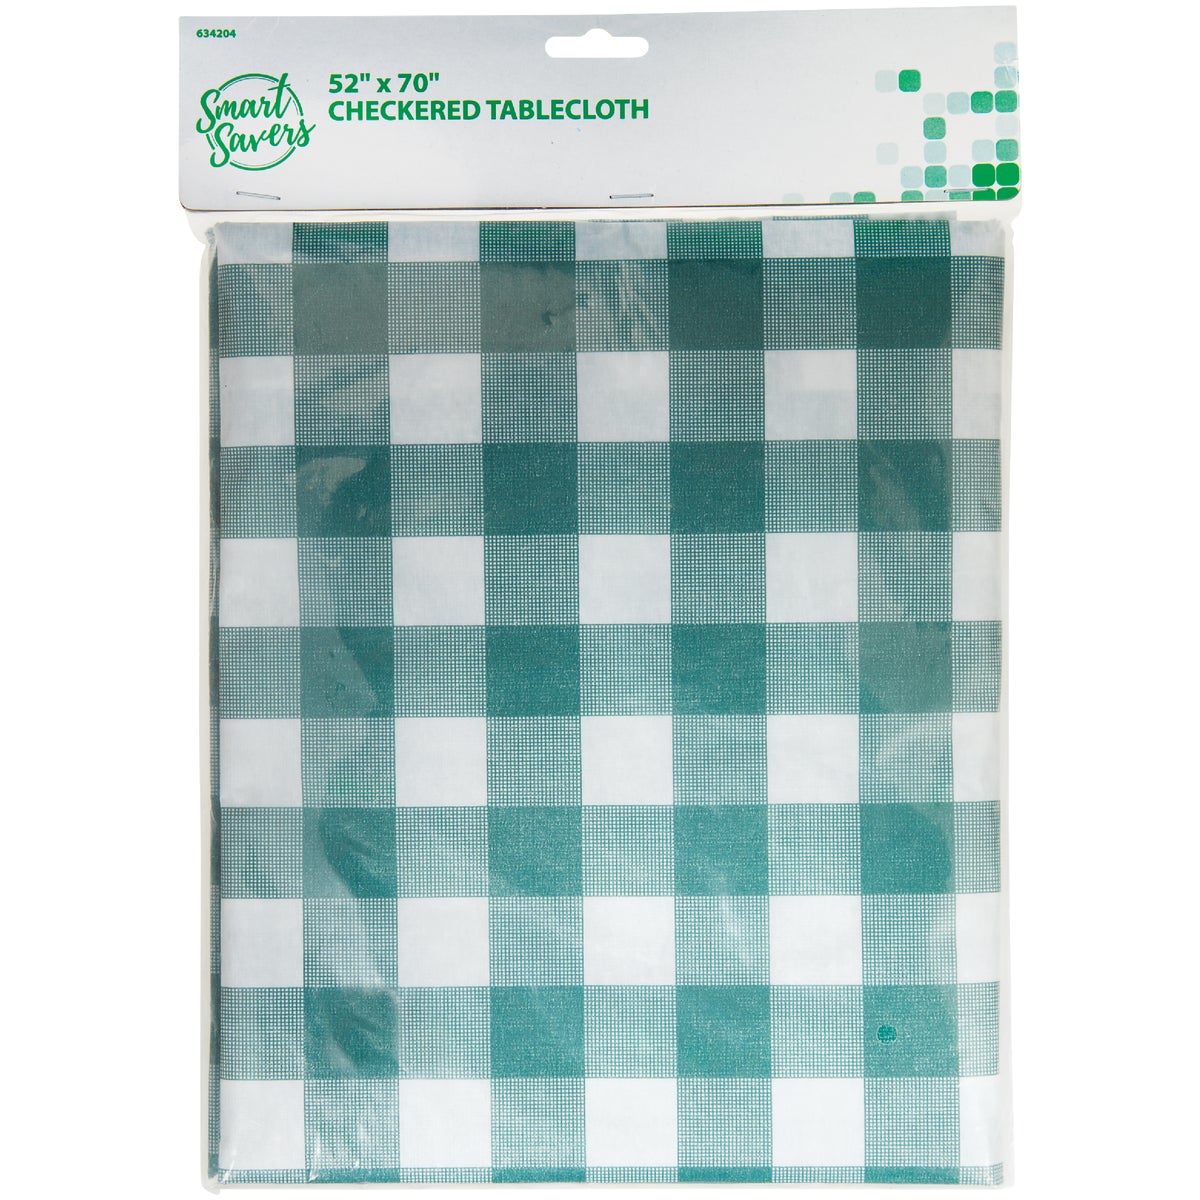 Smart Savers 52 In. W. x 70 In. L. Green & White Checkerboard Tablecloth